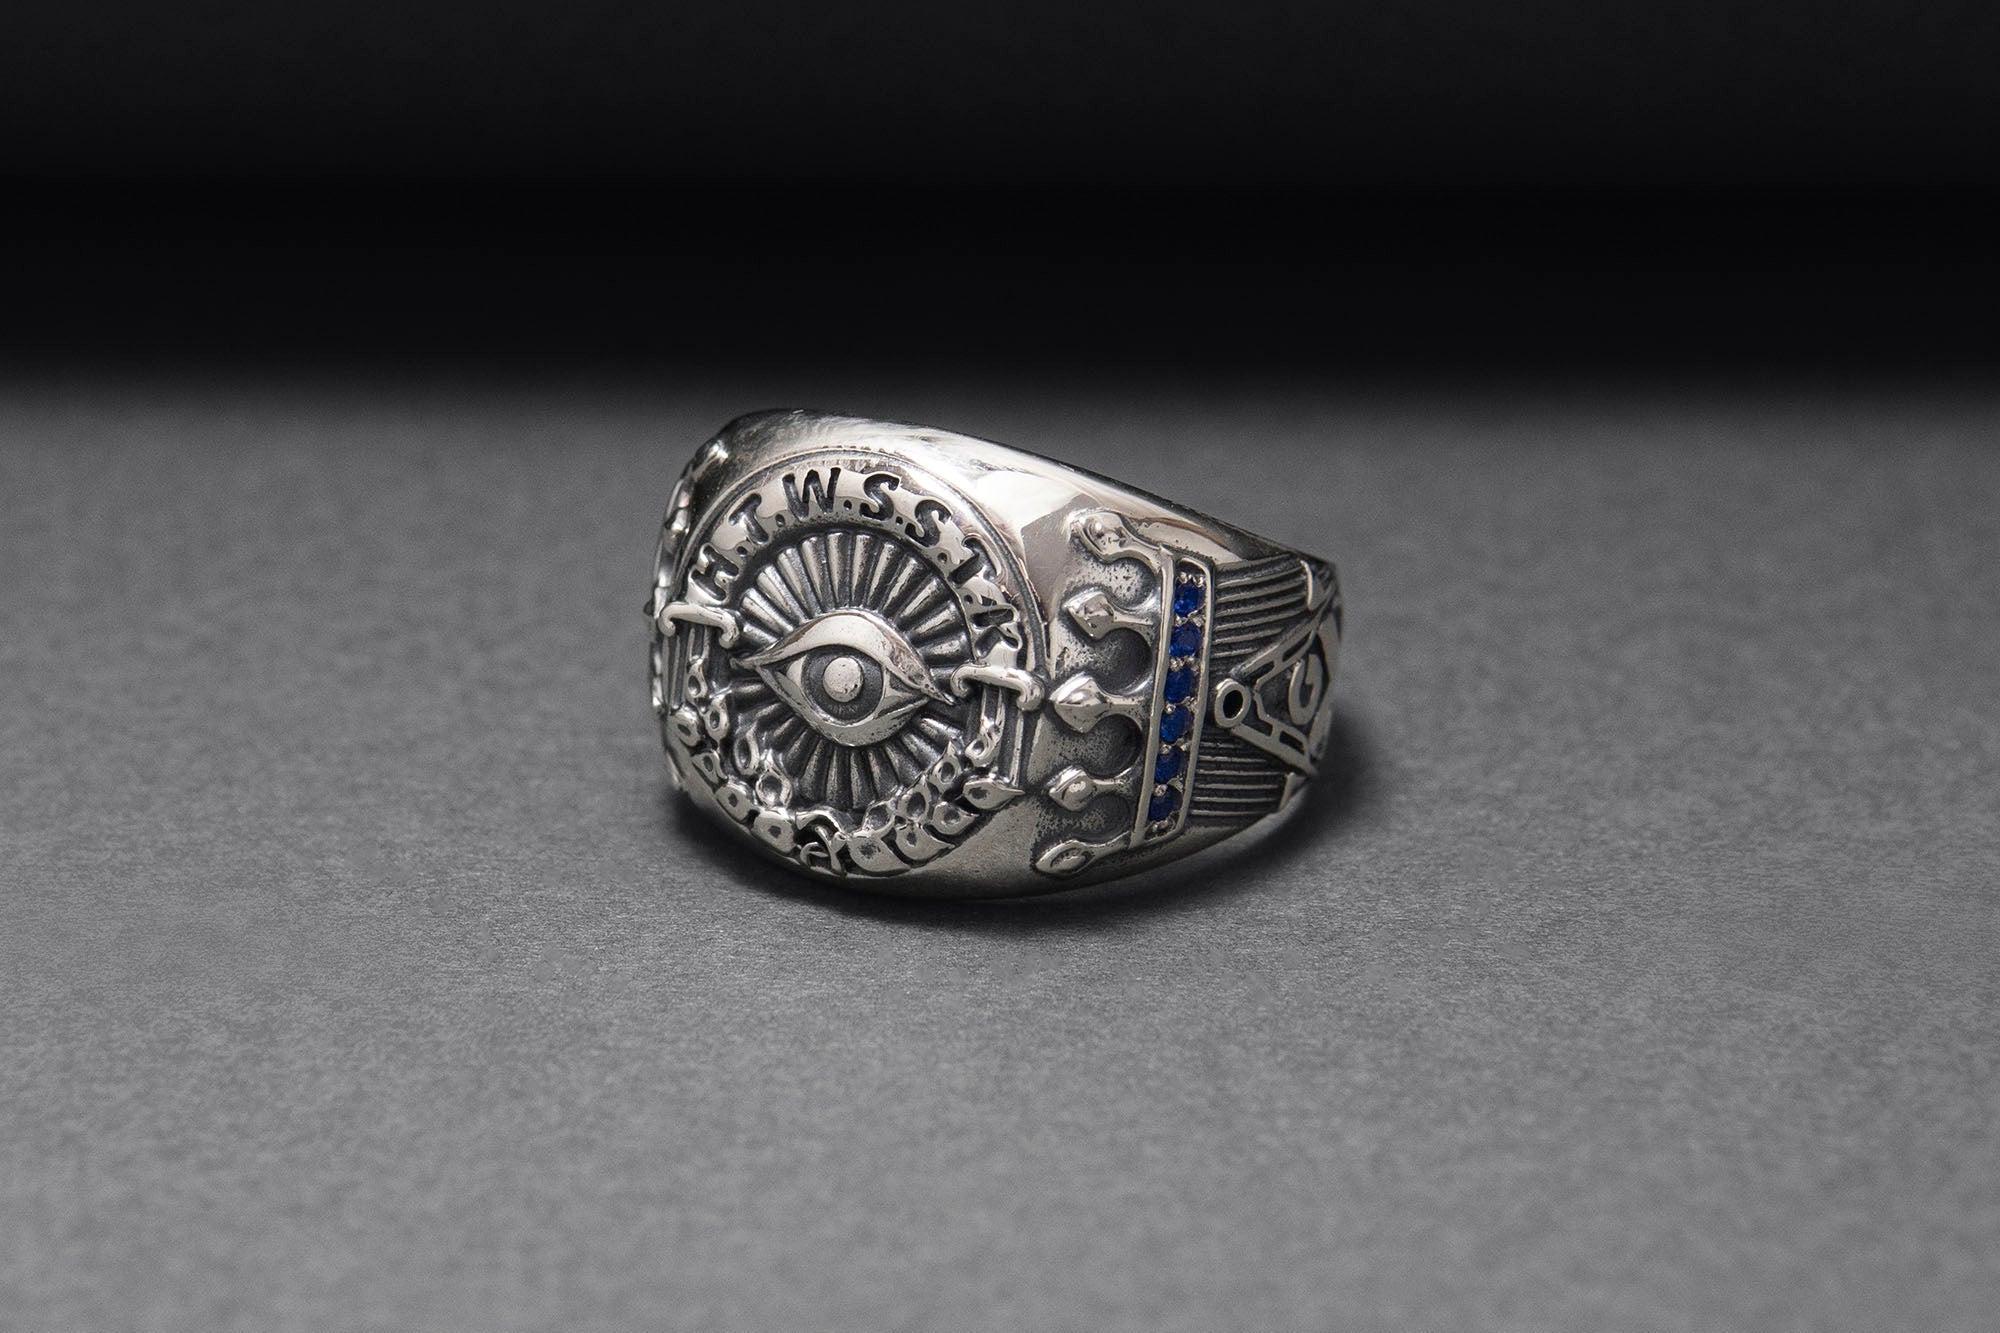 925 Silver H.T.W.S.S.T.K.S Abbreviation Ring with King Solomon's Crown, Handmade Mason Jewelry